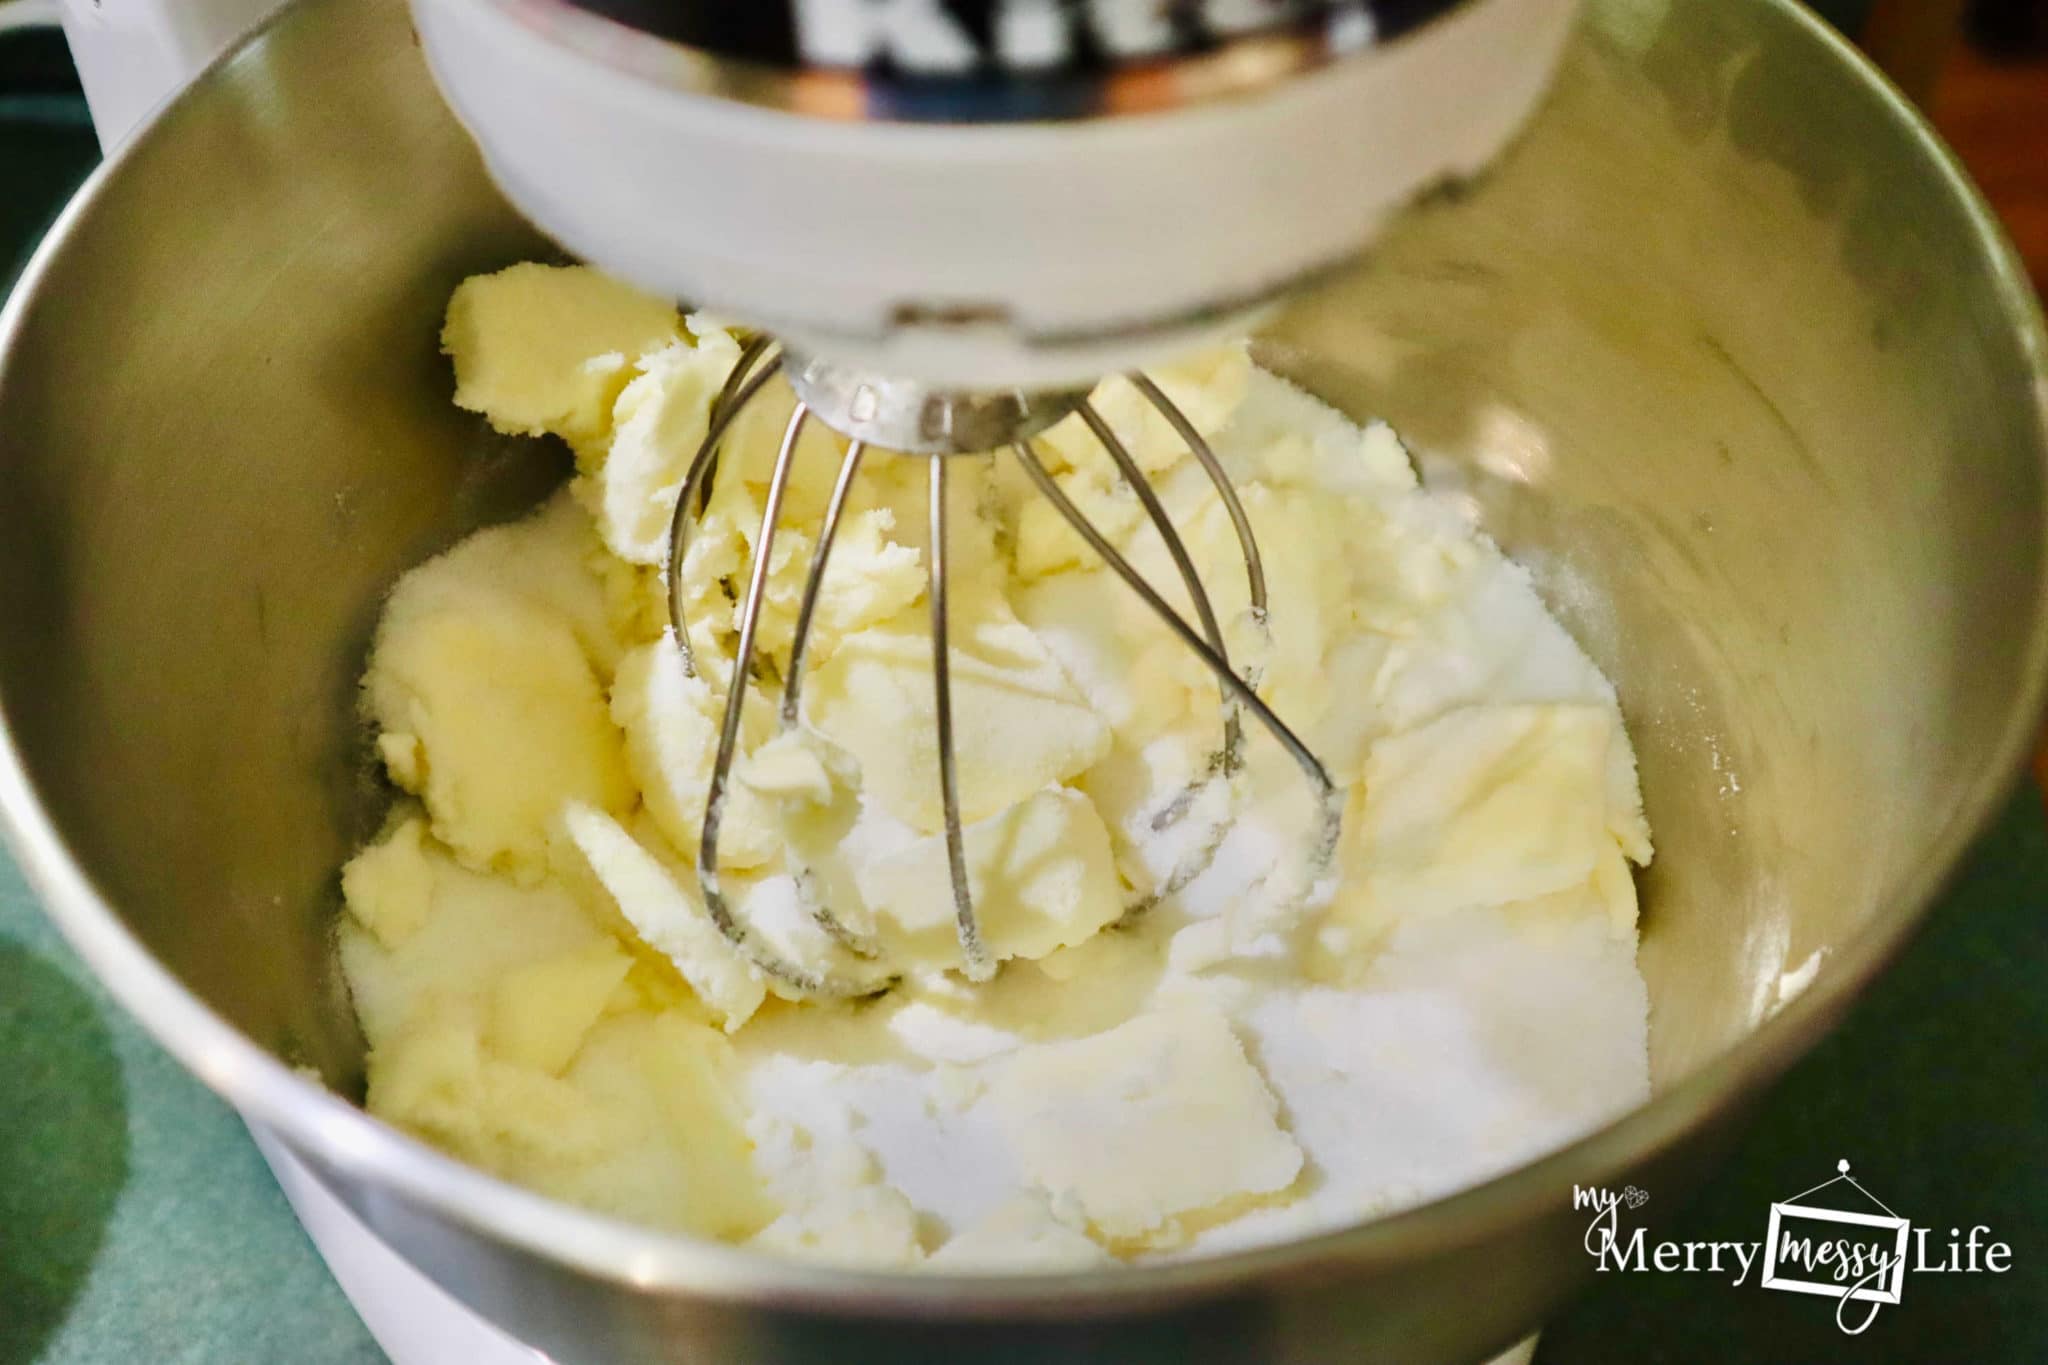 A standing mixer works best for this sour cream pound cake recipe